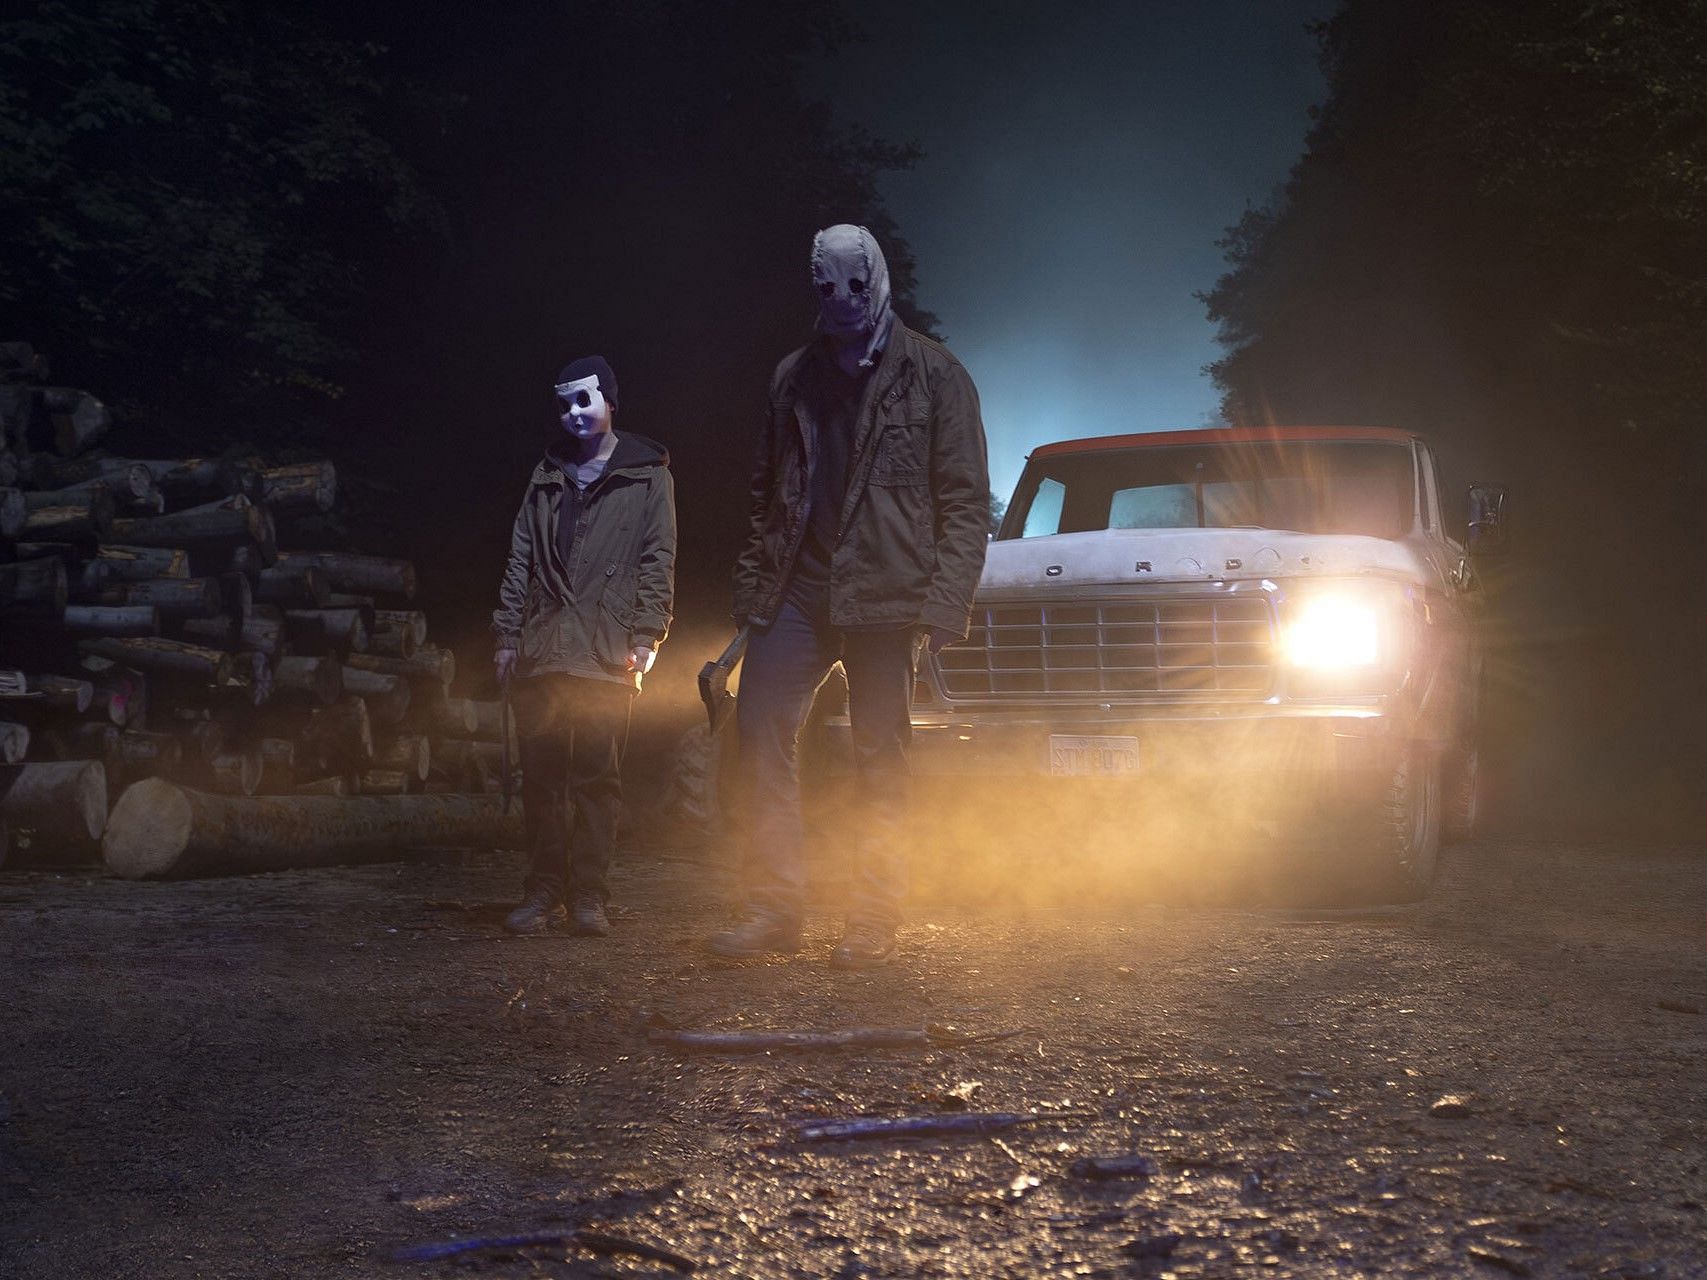 A still from the film (image via The Strangers Chapter 1 official website)